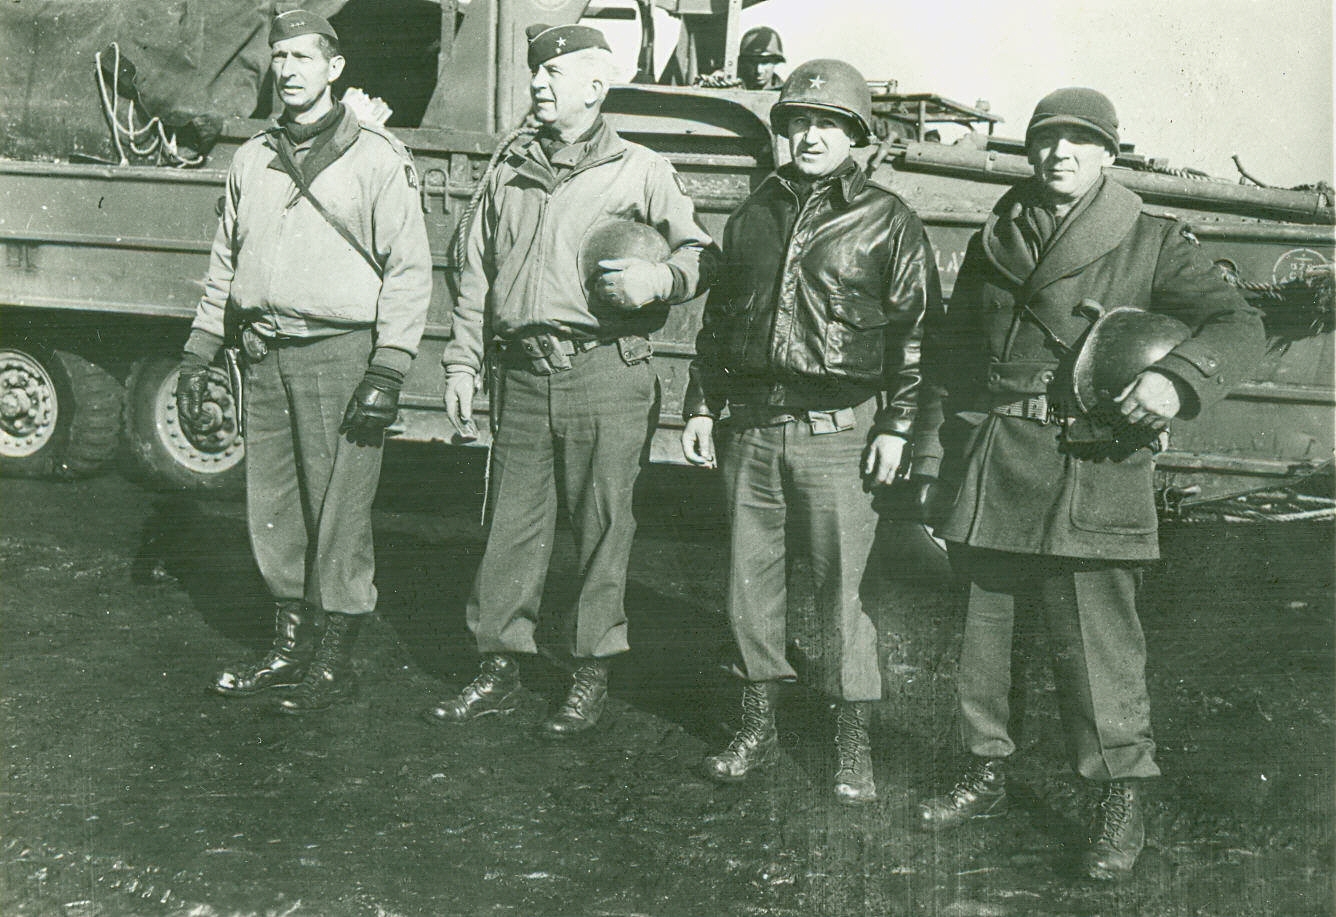 US Army Lieutenant General Mark Clark posing with his brigade commanders in front of a DUKW, 1944